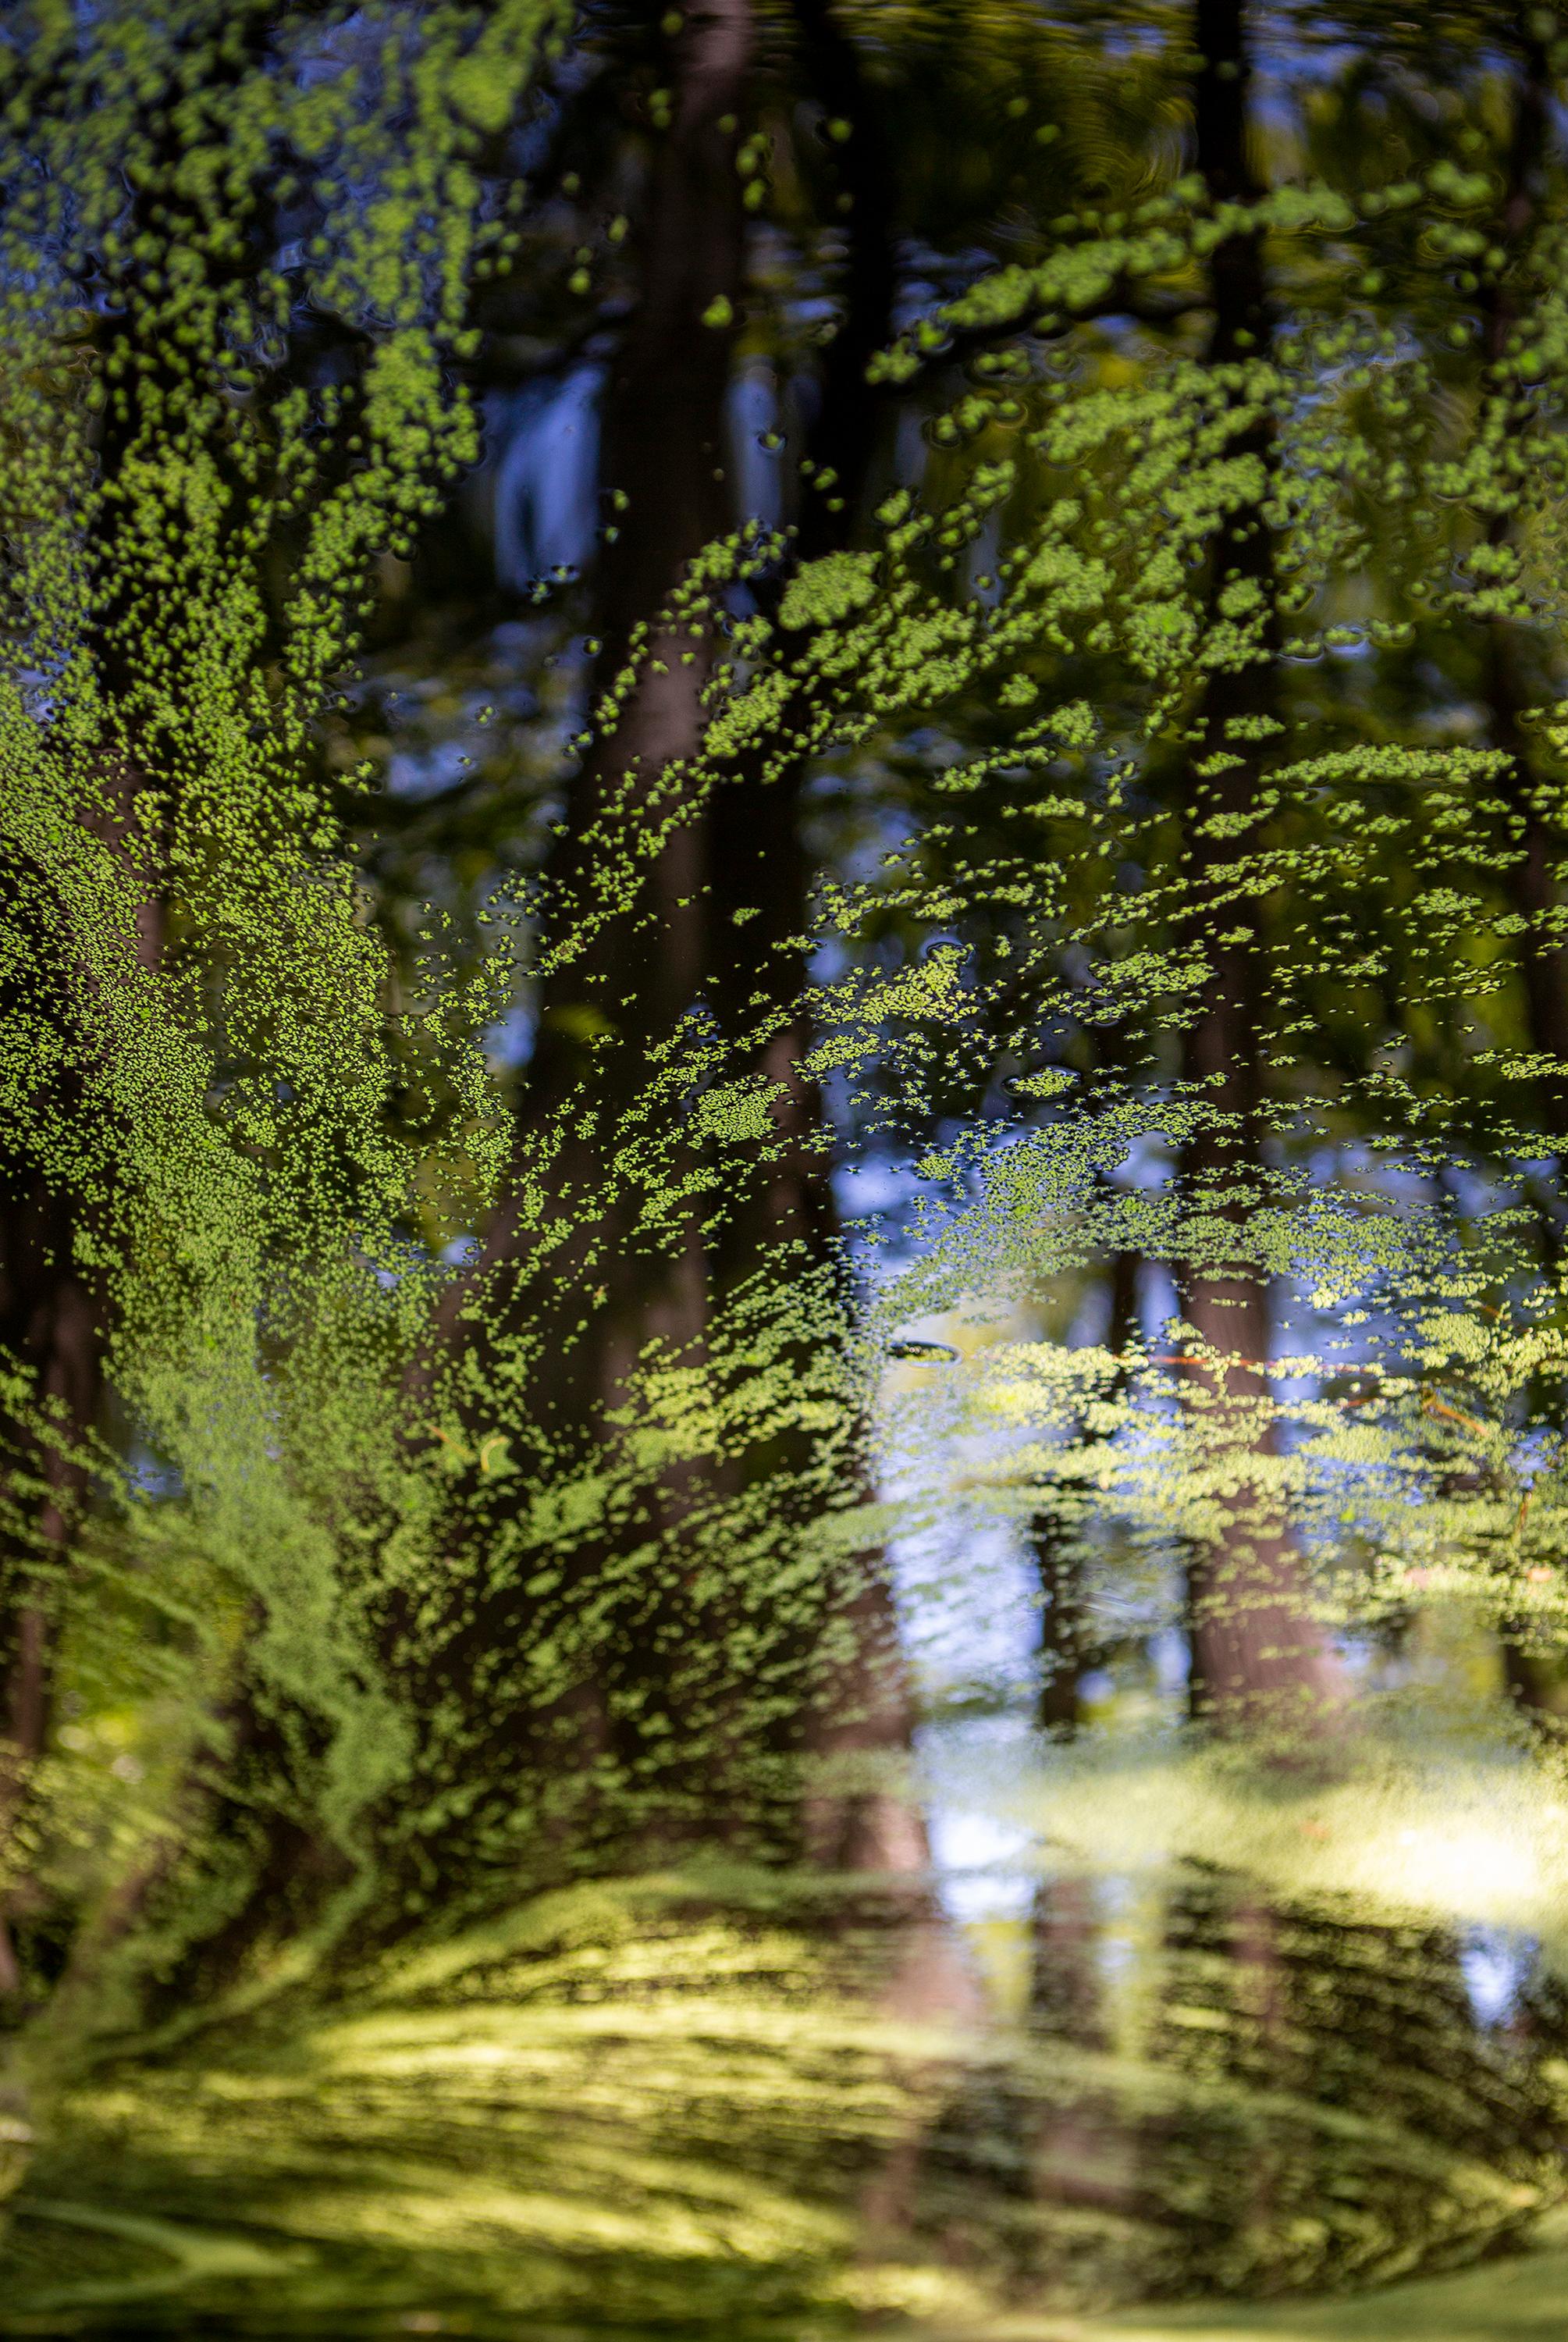 Nature Painting Ebenezer No. 1 - swamp - water - southern photography - Photograph by Cecilia Montalvo & Charlie McCullers